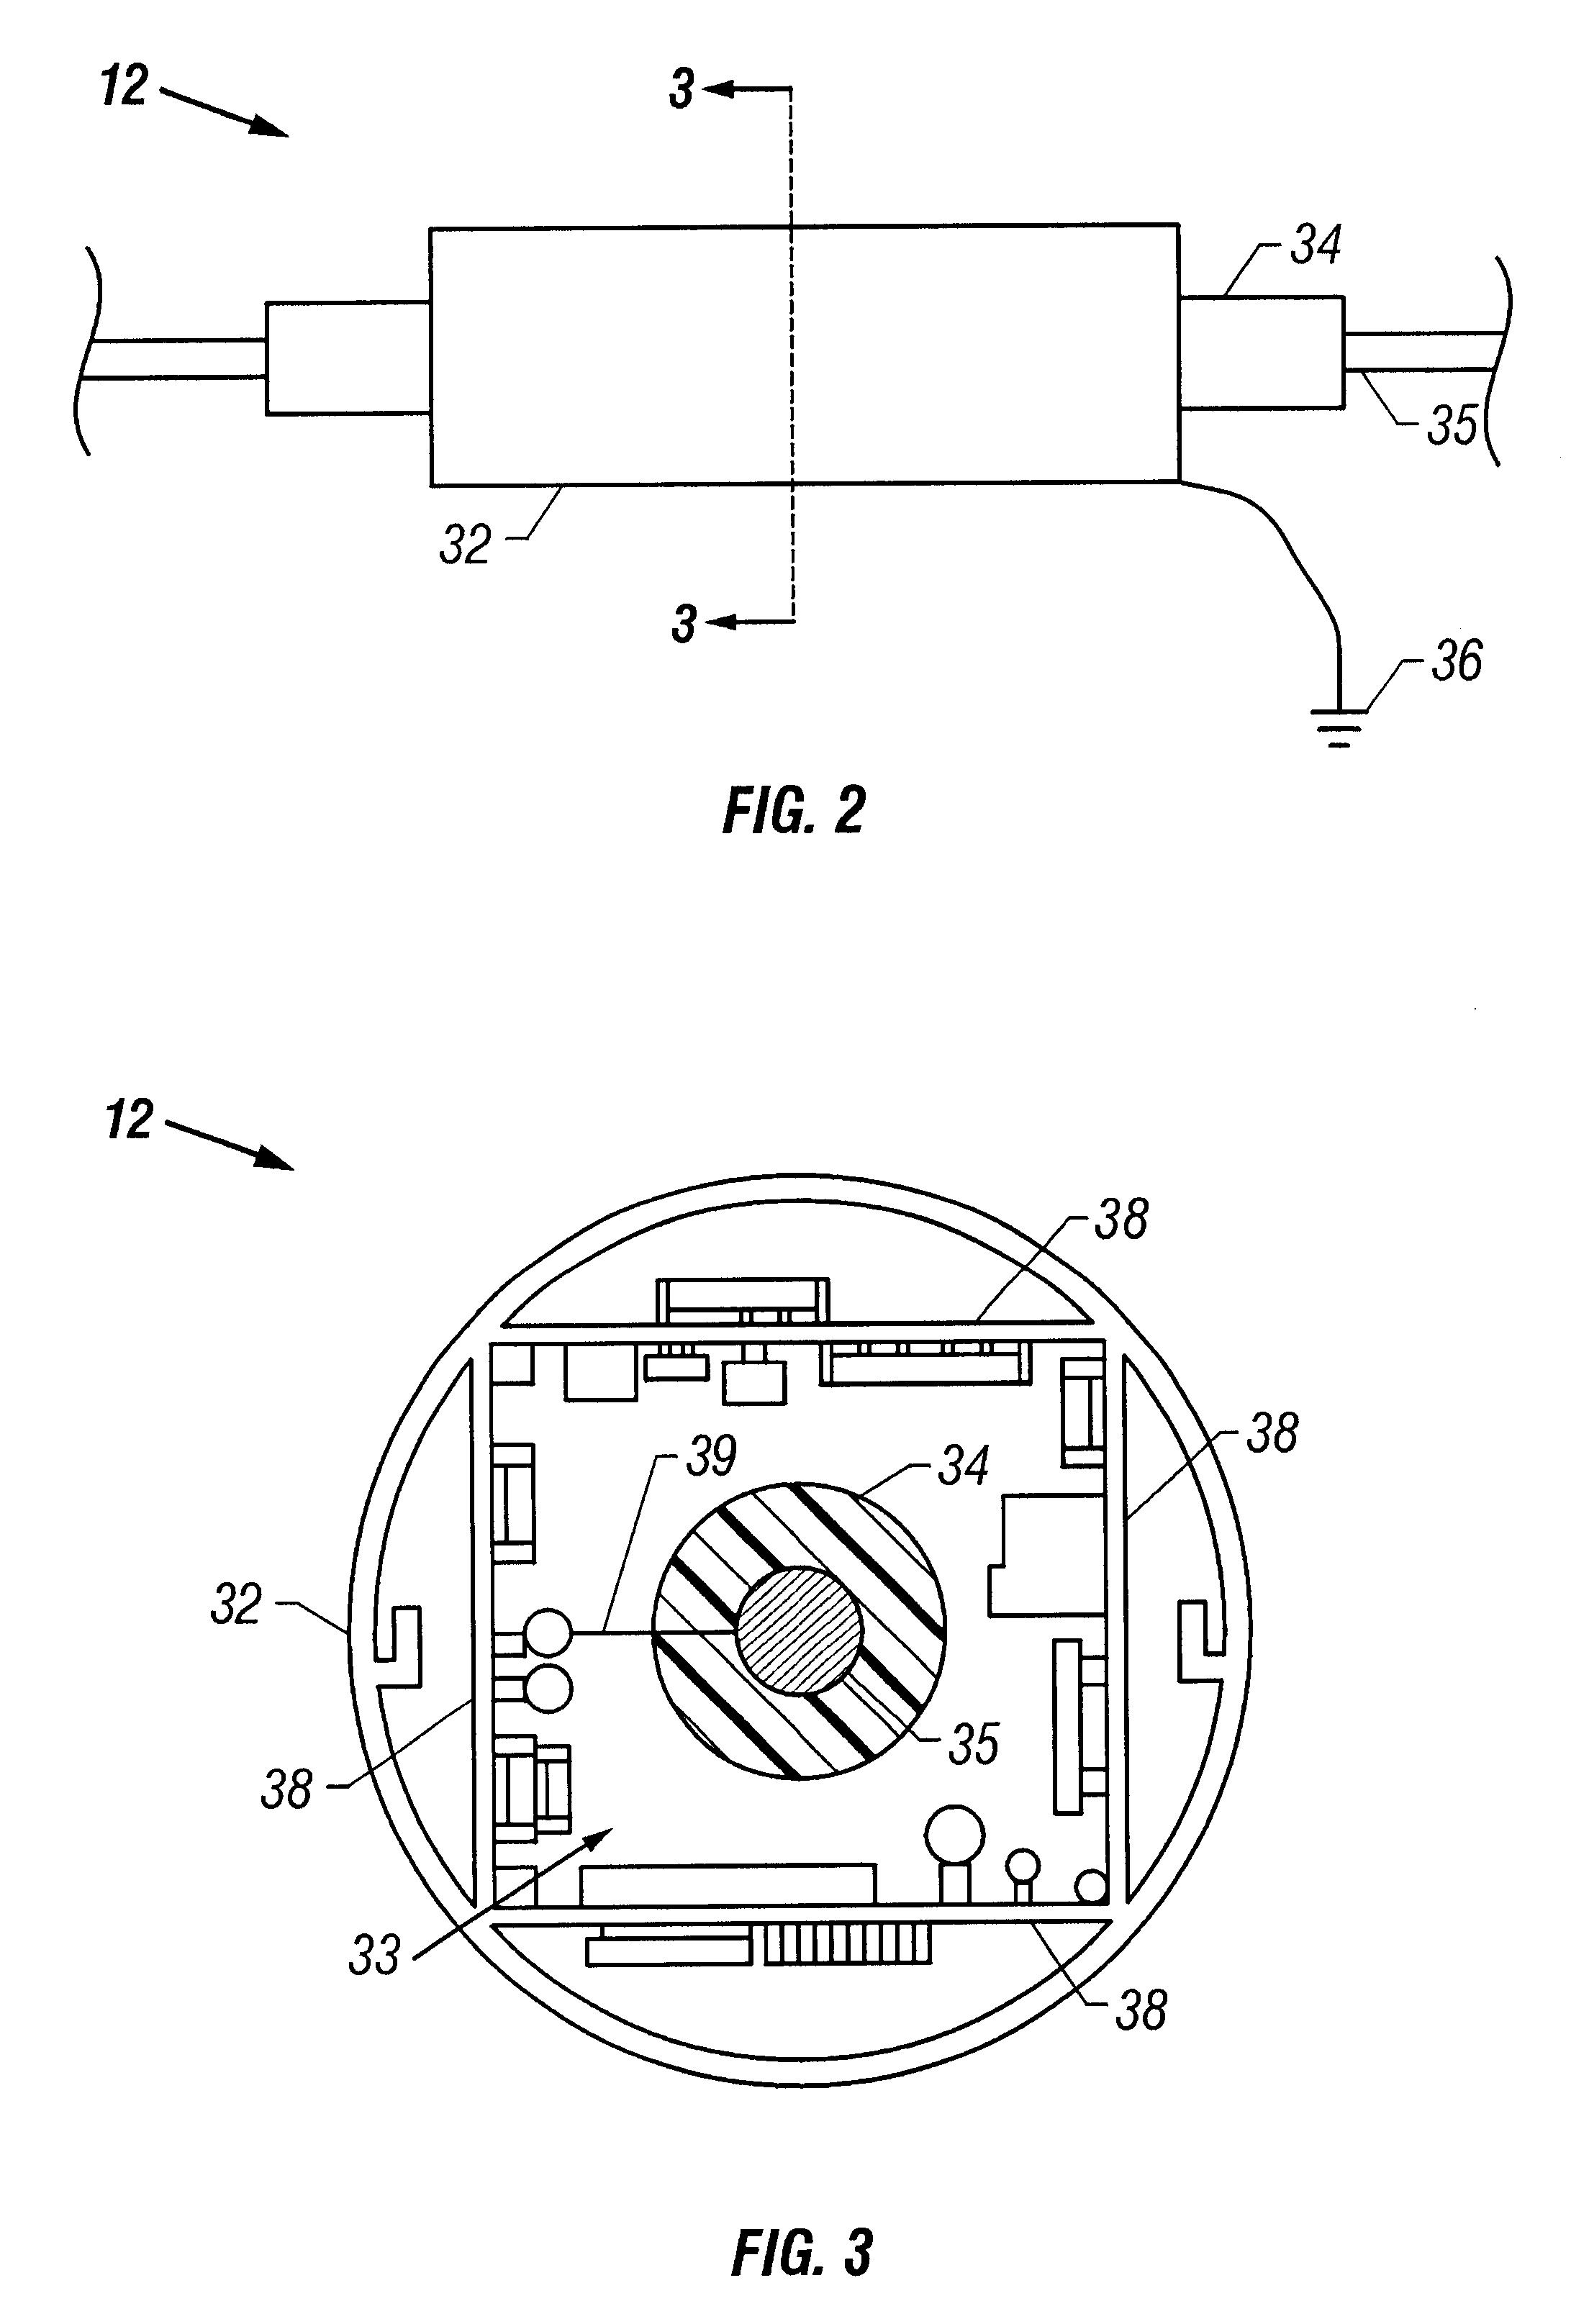 Vehicle-status device and system for remotely updating and locally indicating the status of a vehicle